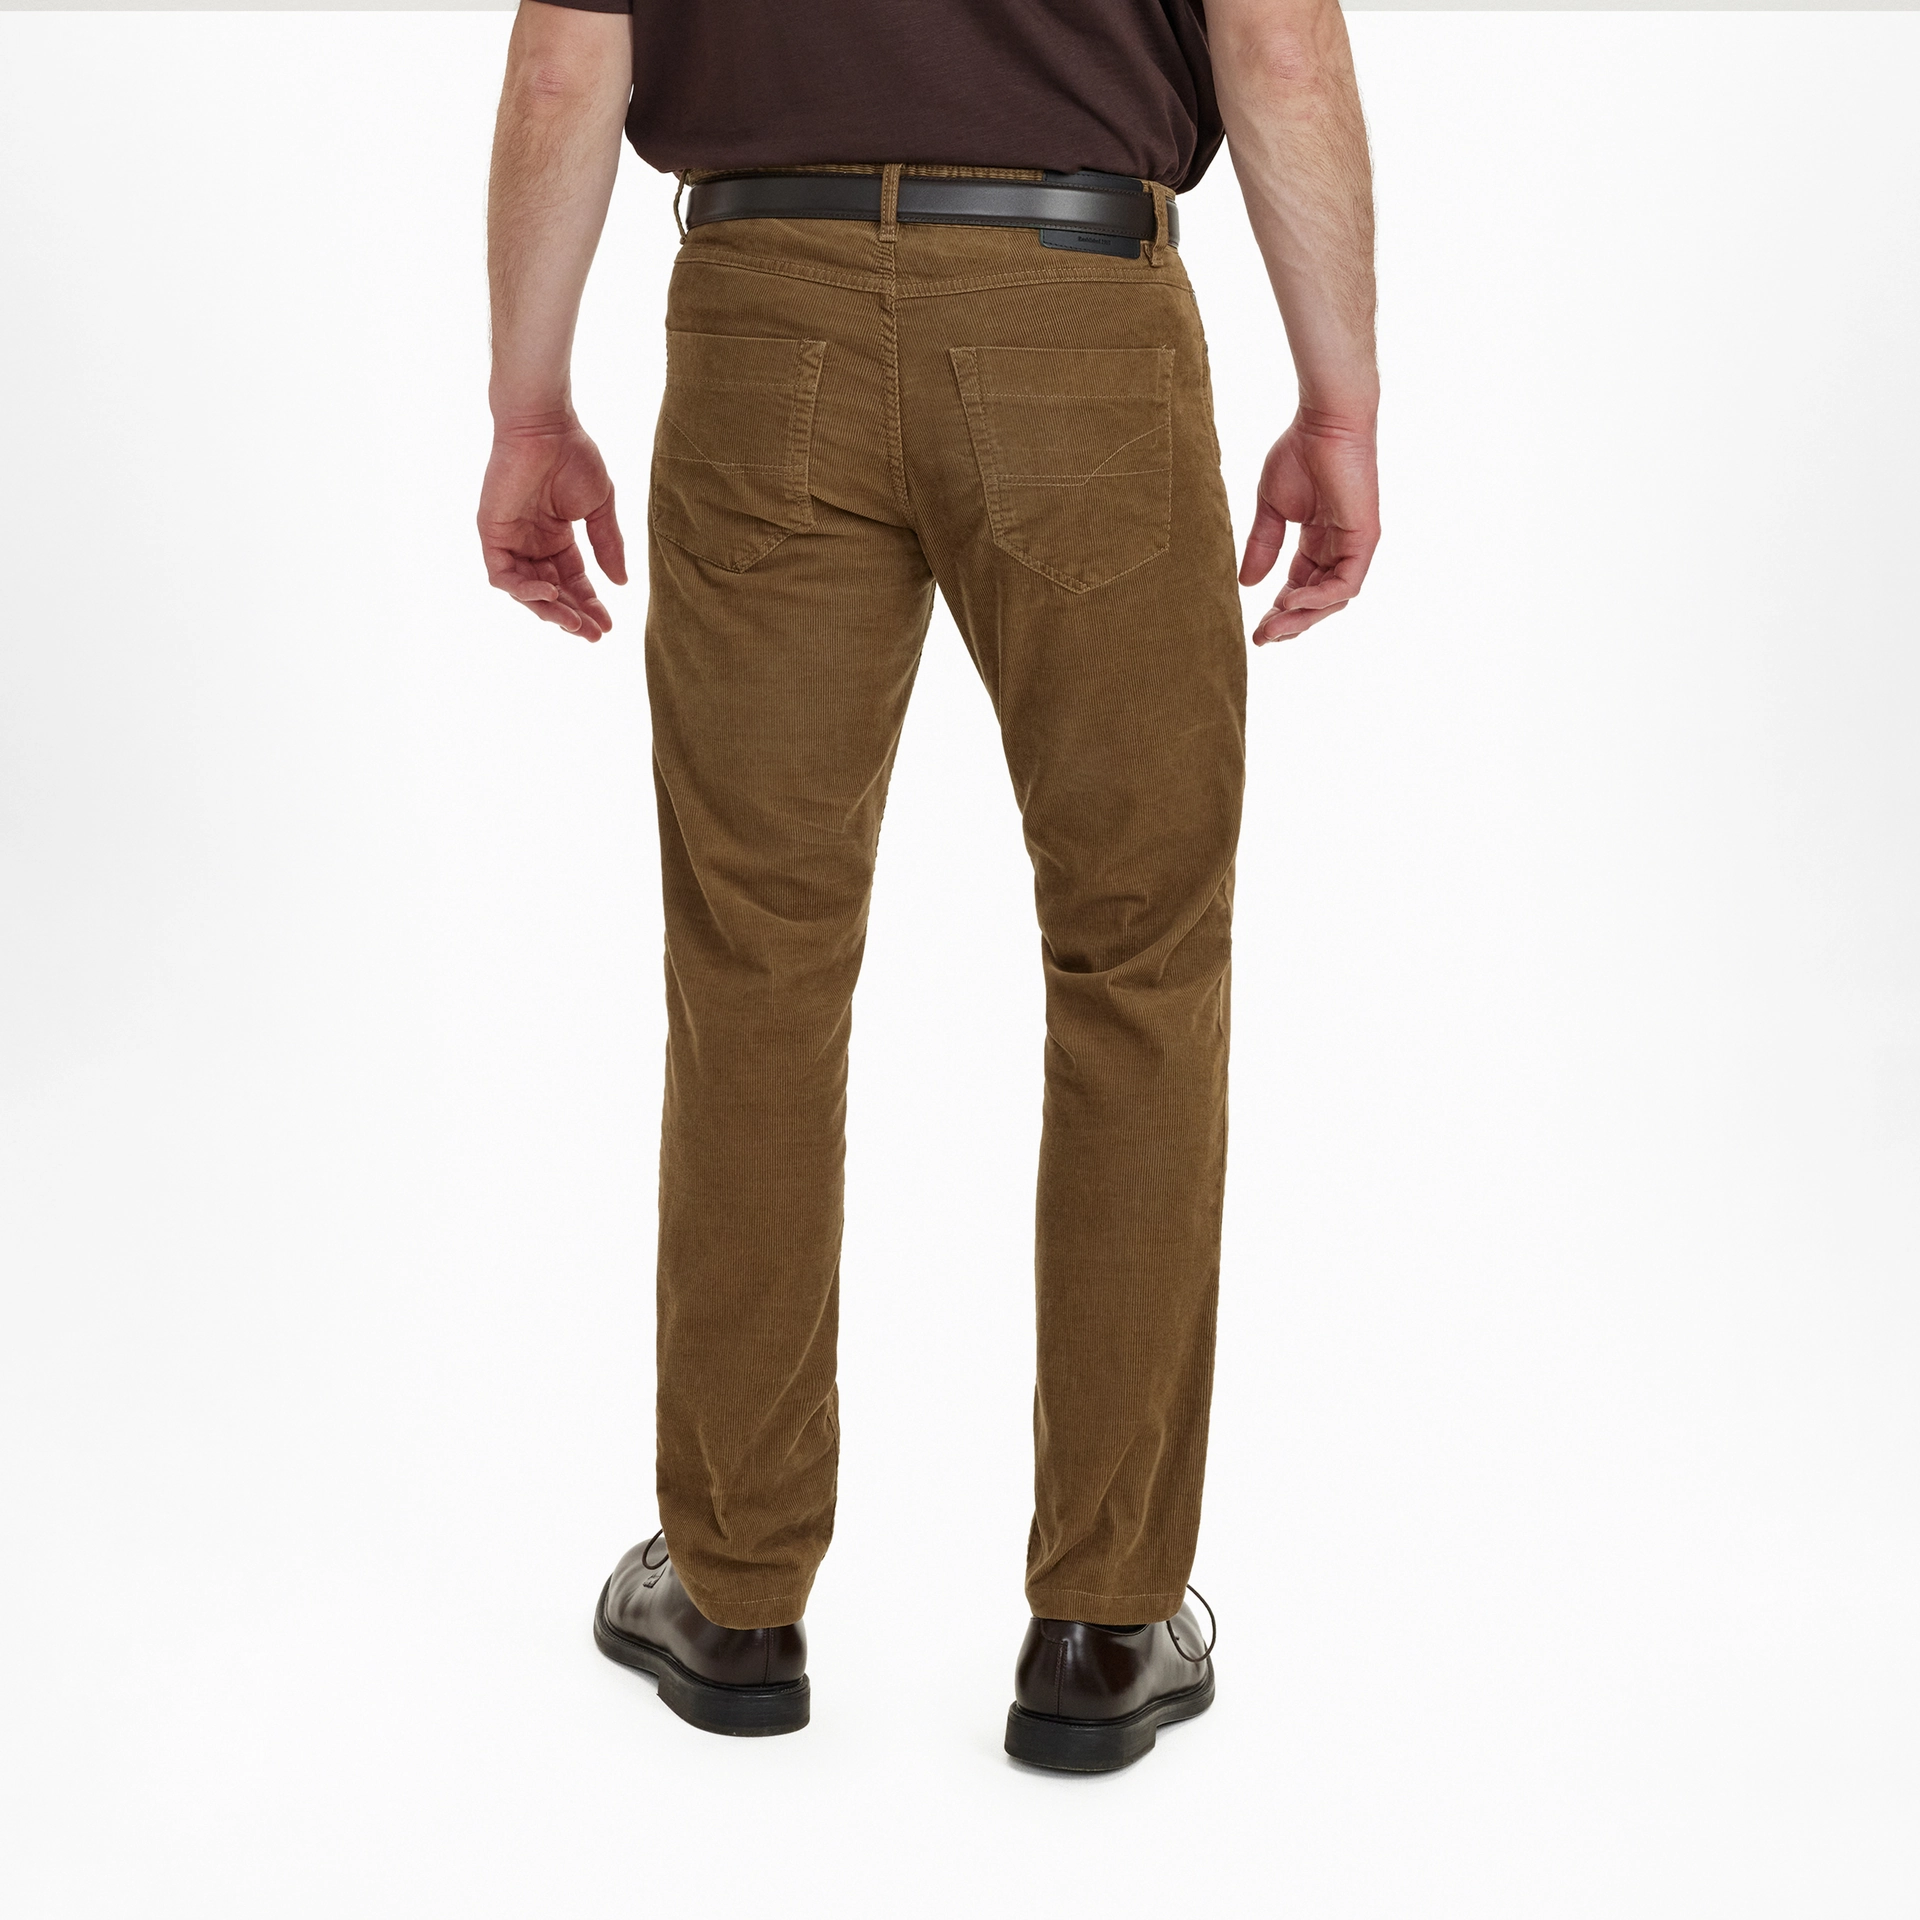 Cordhose - Fitted fit